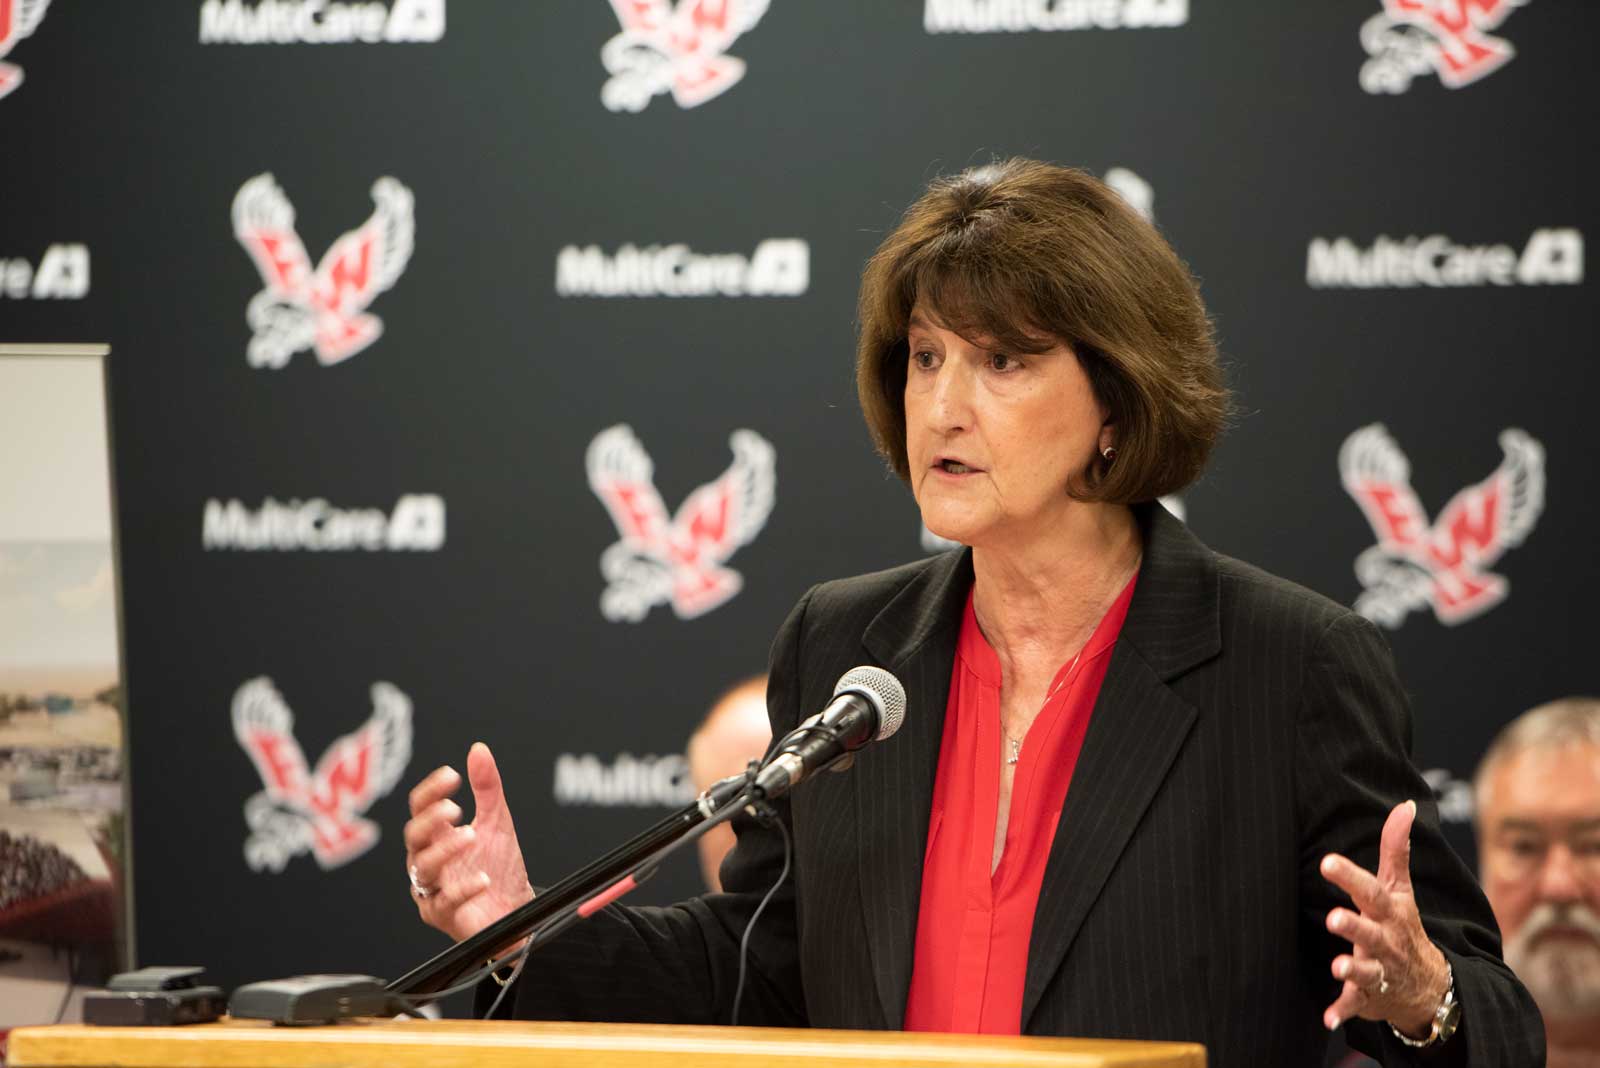 Lynn Hickey speaks at a podium during a press conference